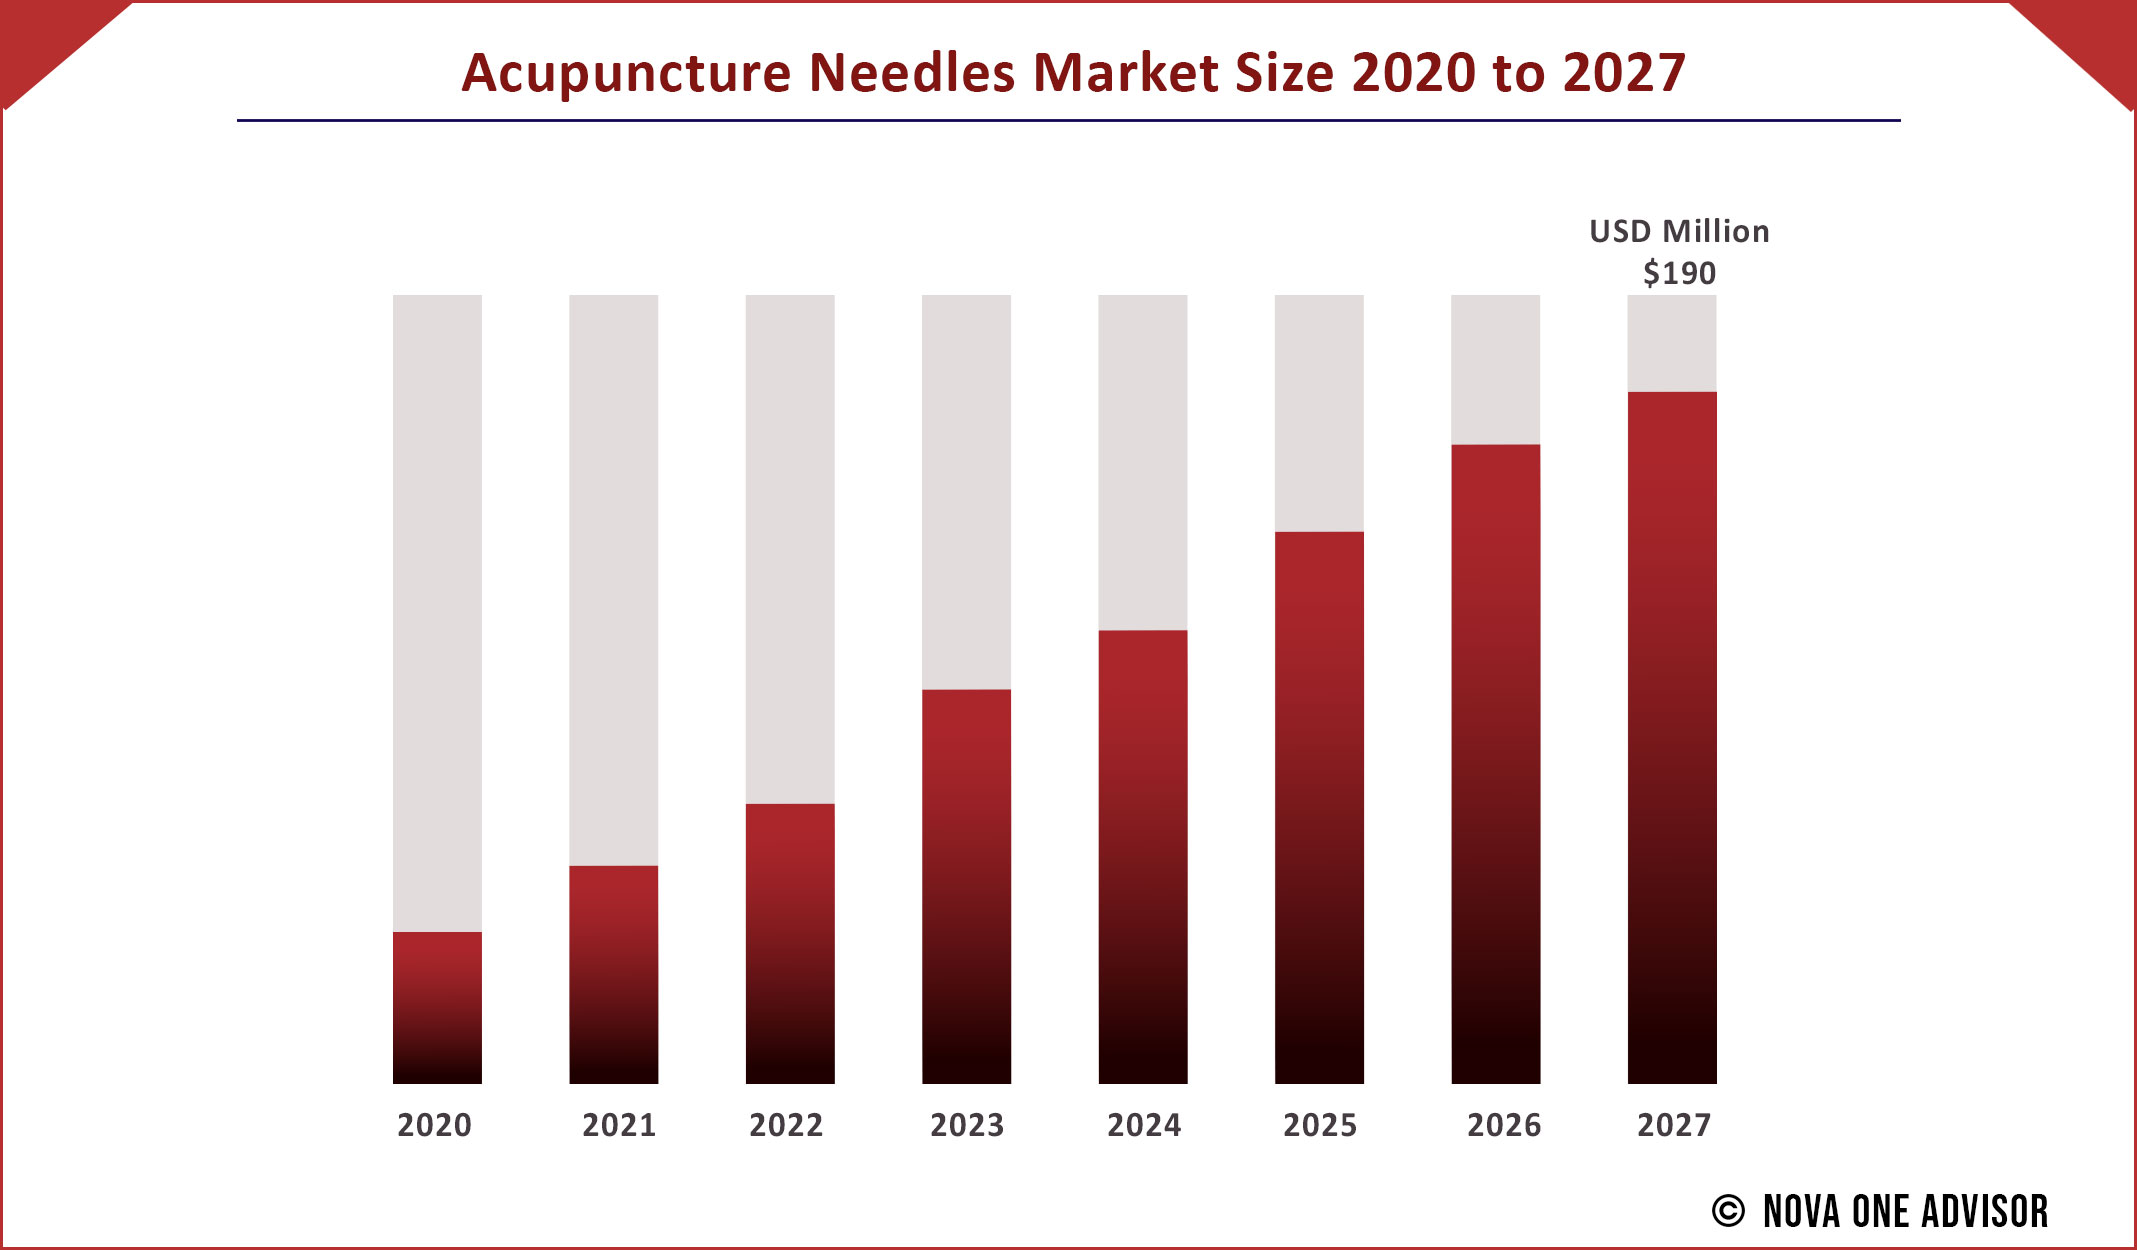 Acupuncture Needles Market Size 2020 to 2027